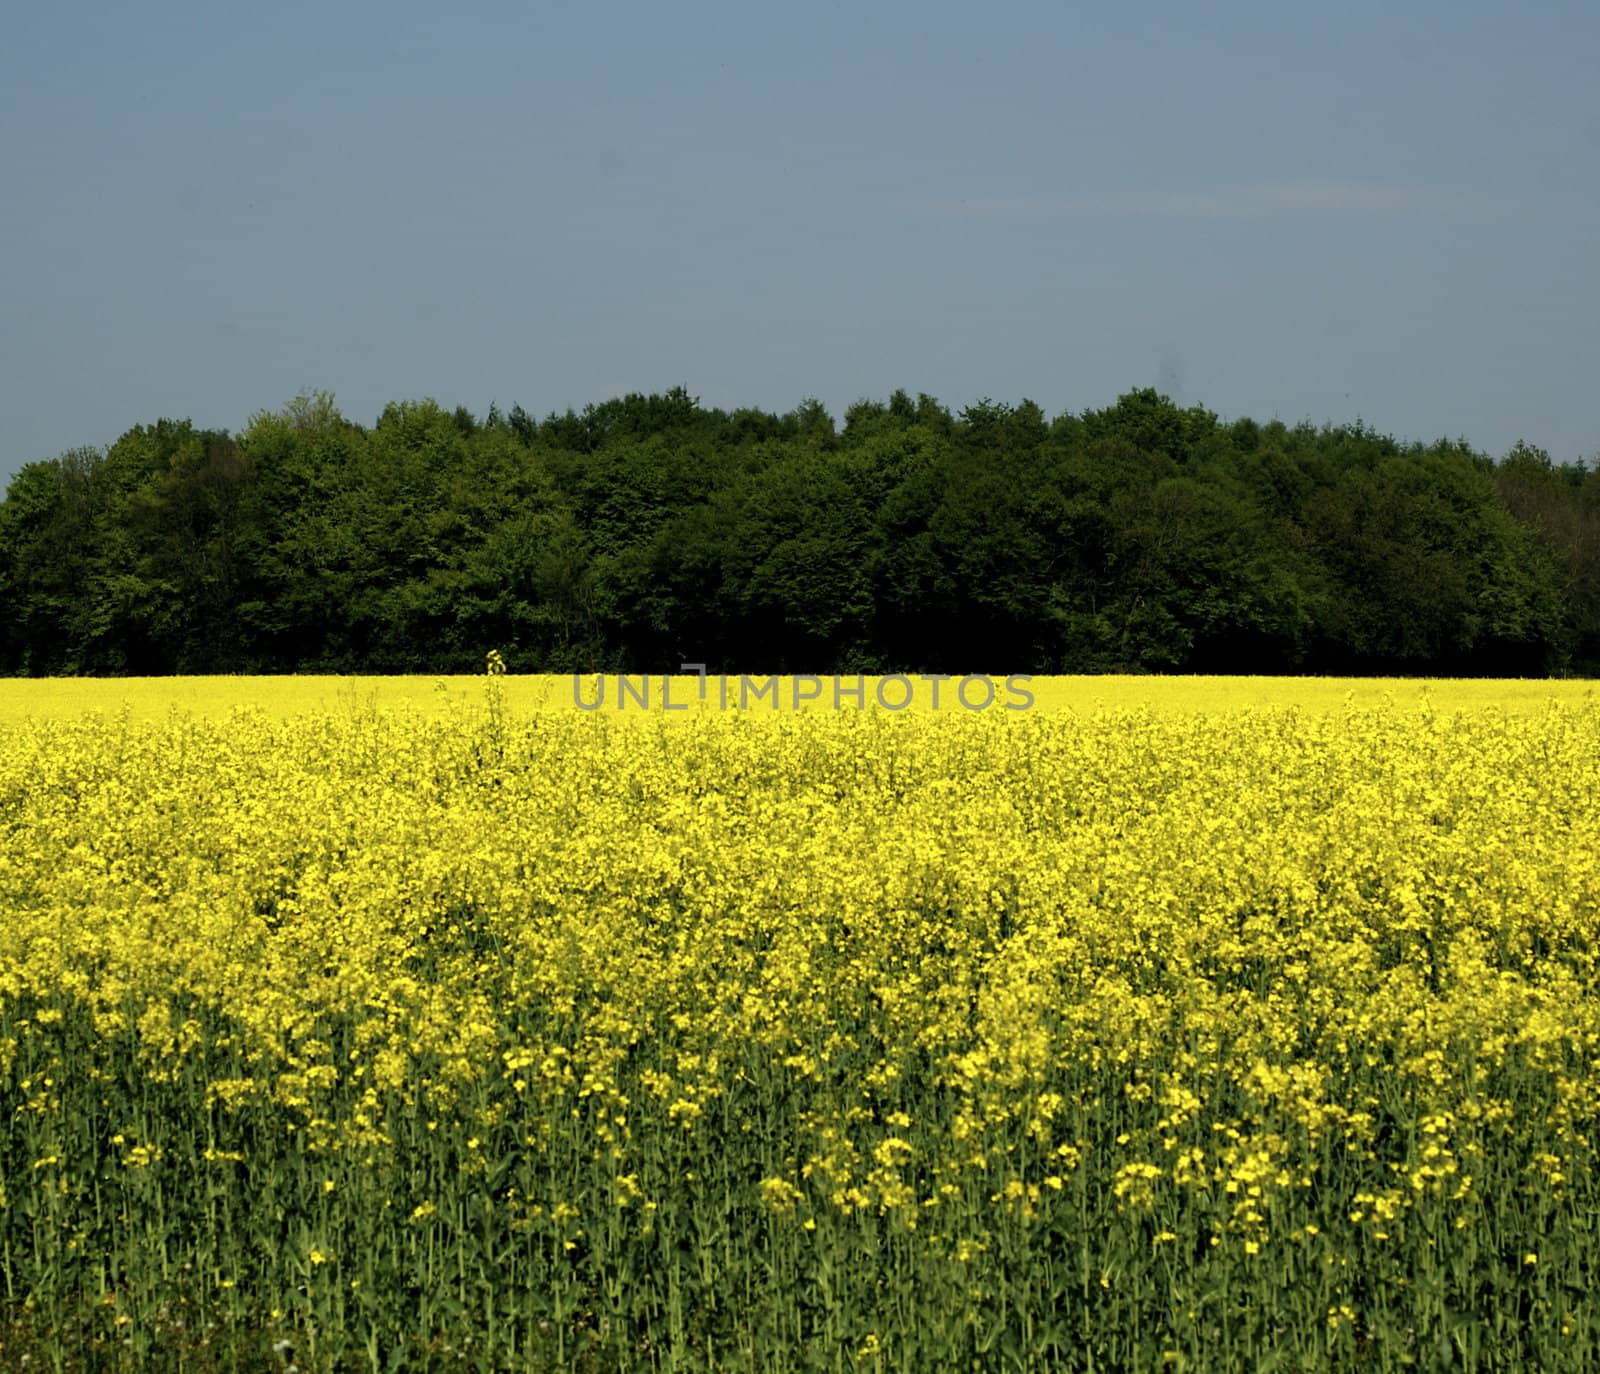 Typical English countryside with a bright yellow rape field in the foreground, with dark green trees on the horizon against a pure blue sky, with copy space.